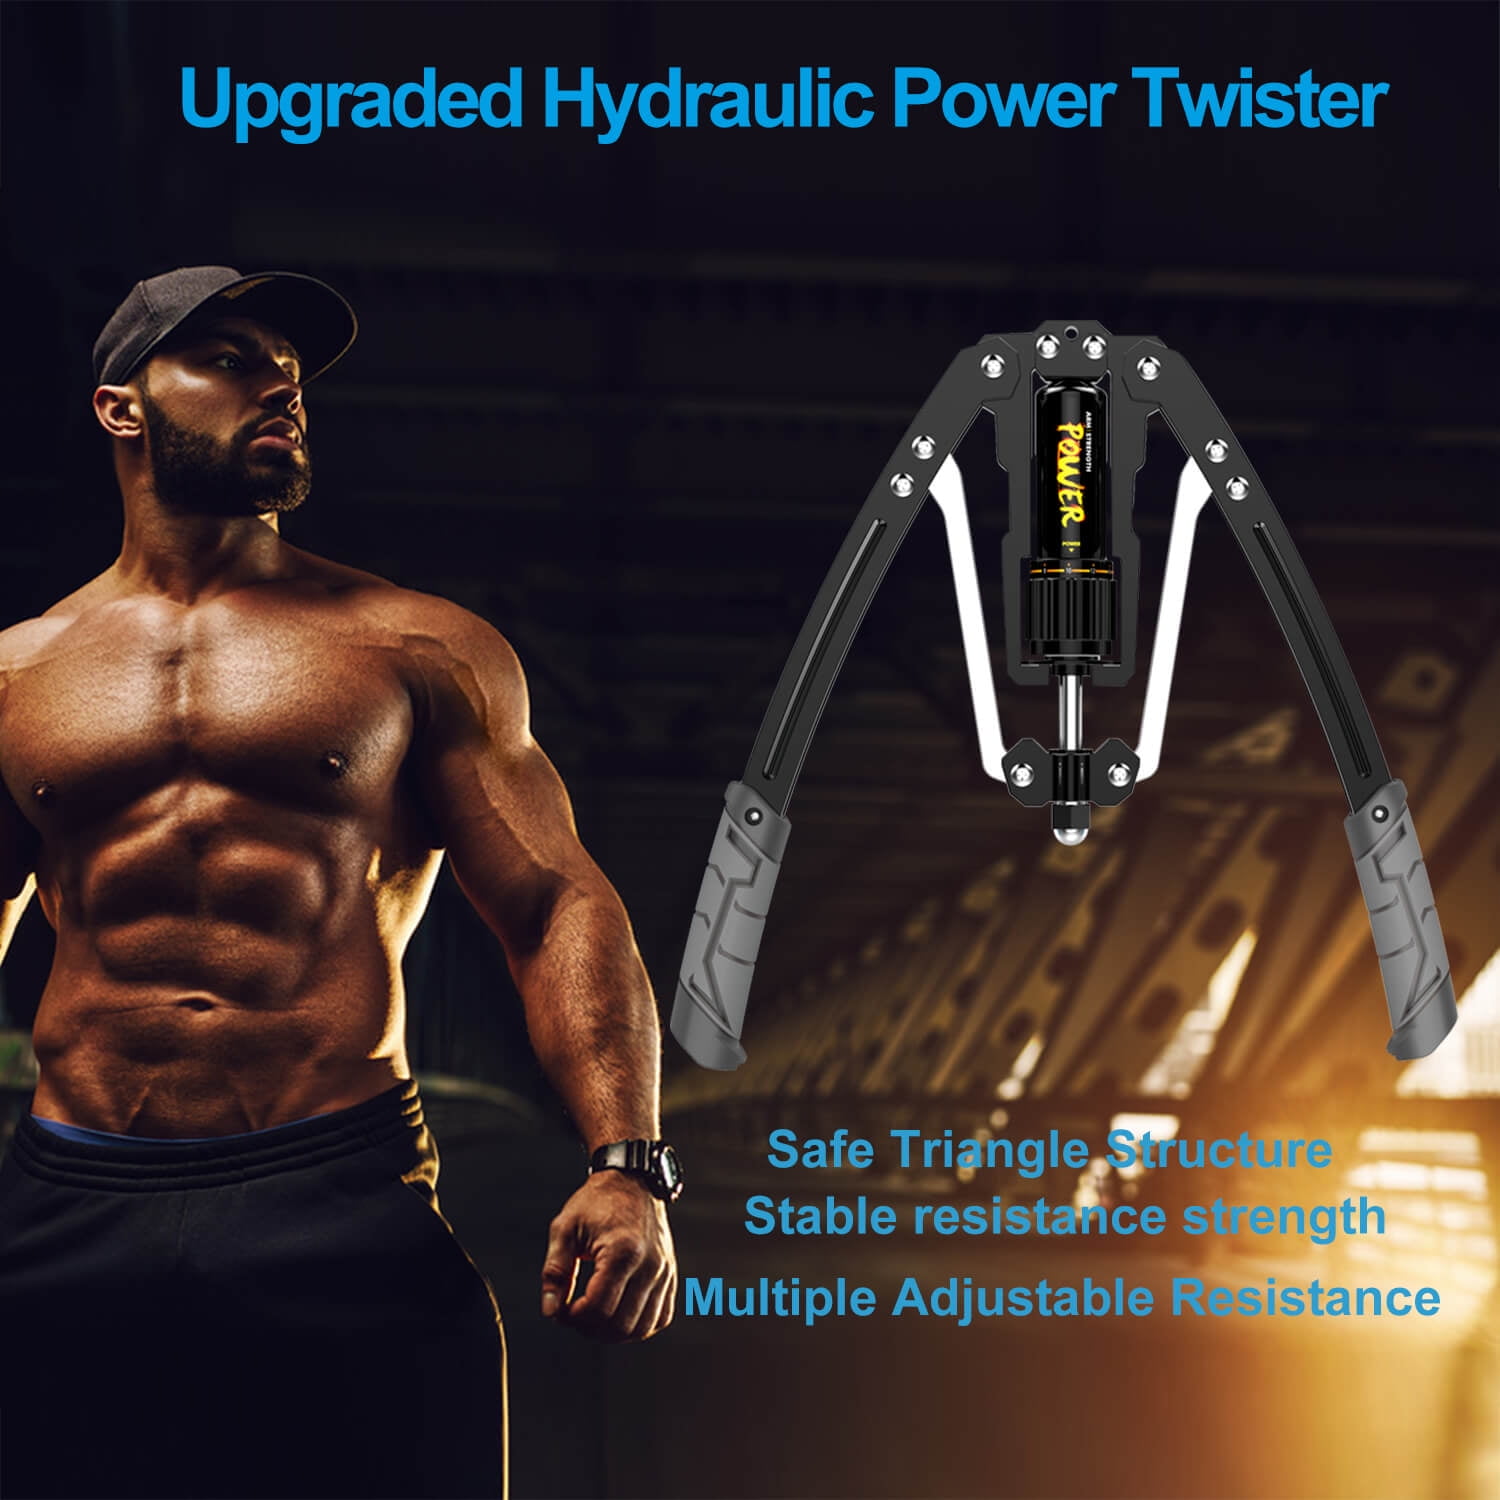 Adjustable Hydraulic Power Twister for Arm and Chest Exercise, LCD Display,  Safe Fitness, Golden Ratio Triangle Structure, Home Gym Equipment